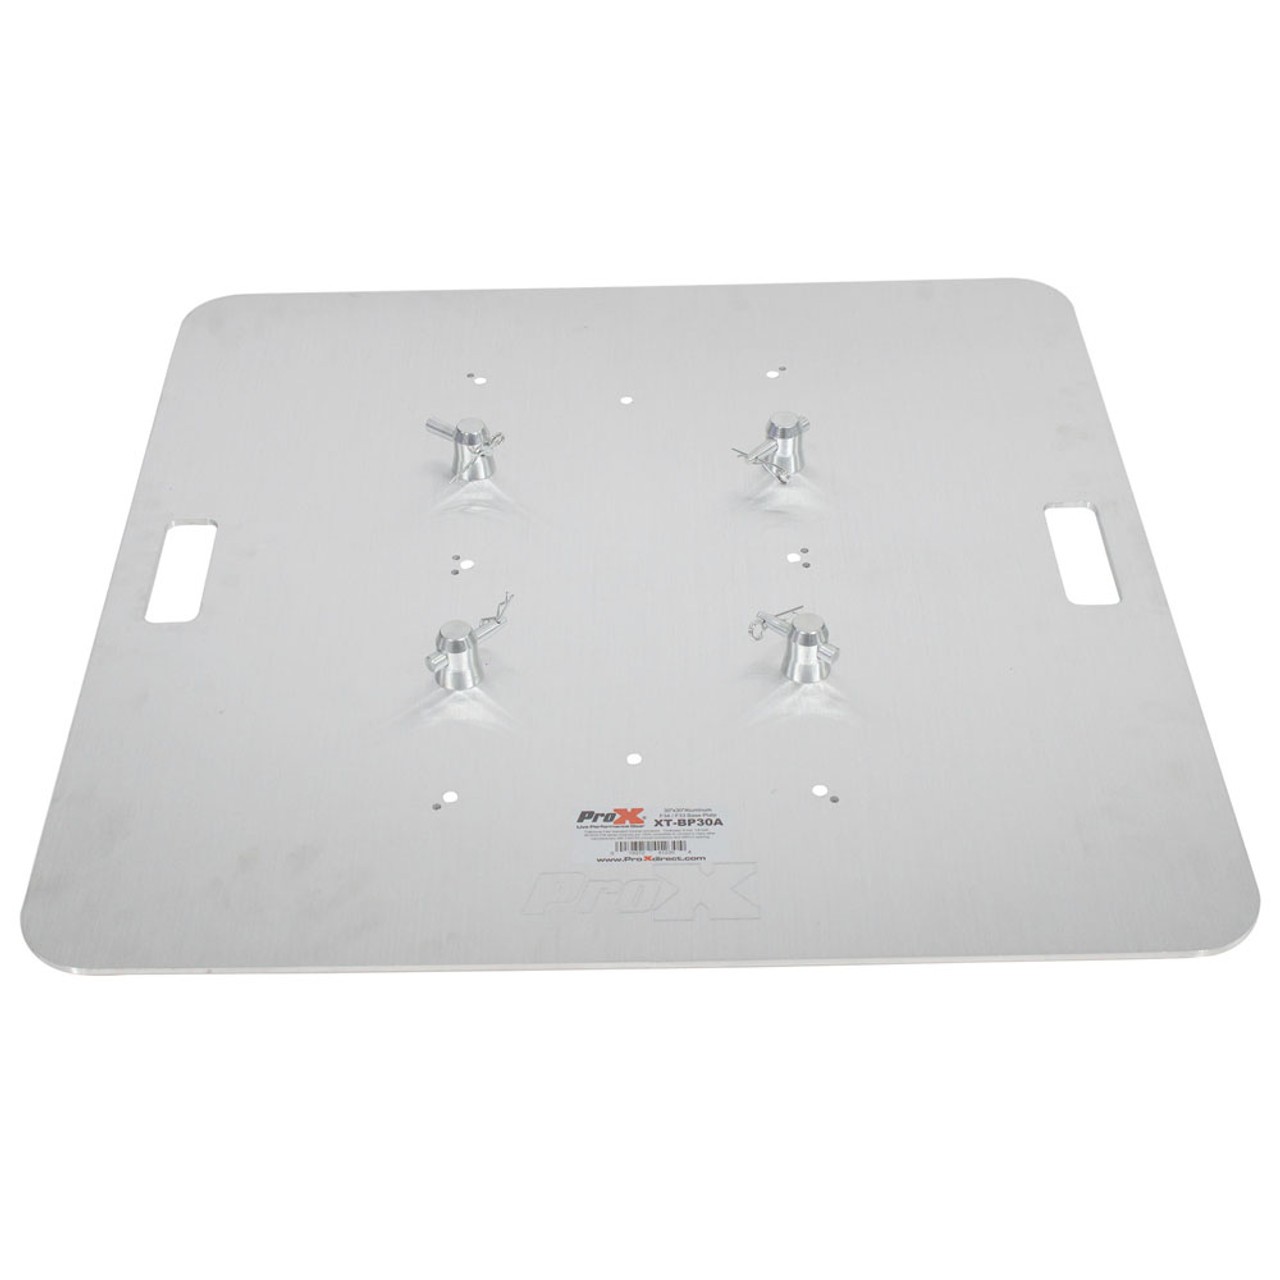 ProX XT-BP30A MK2 30" X 30" 8mm Aluminum Base Plate for F34 and F33 Trussing Fits Most Manufacturers W-Conical Connectors